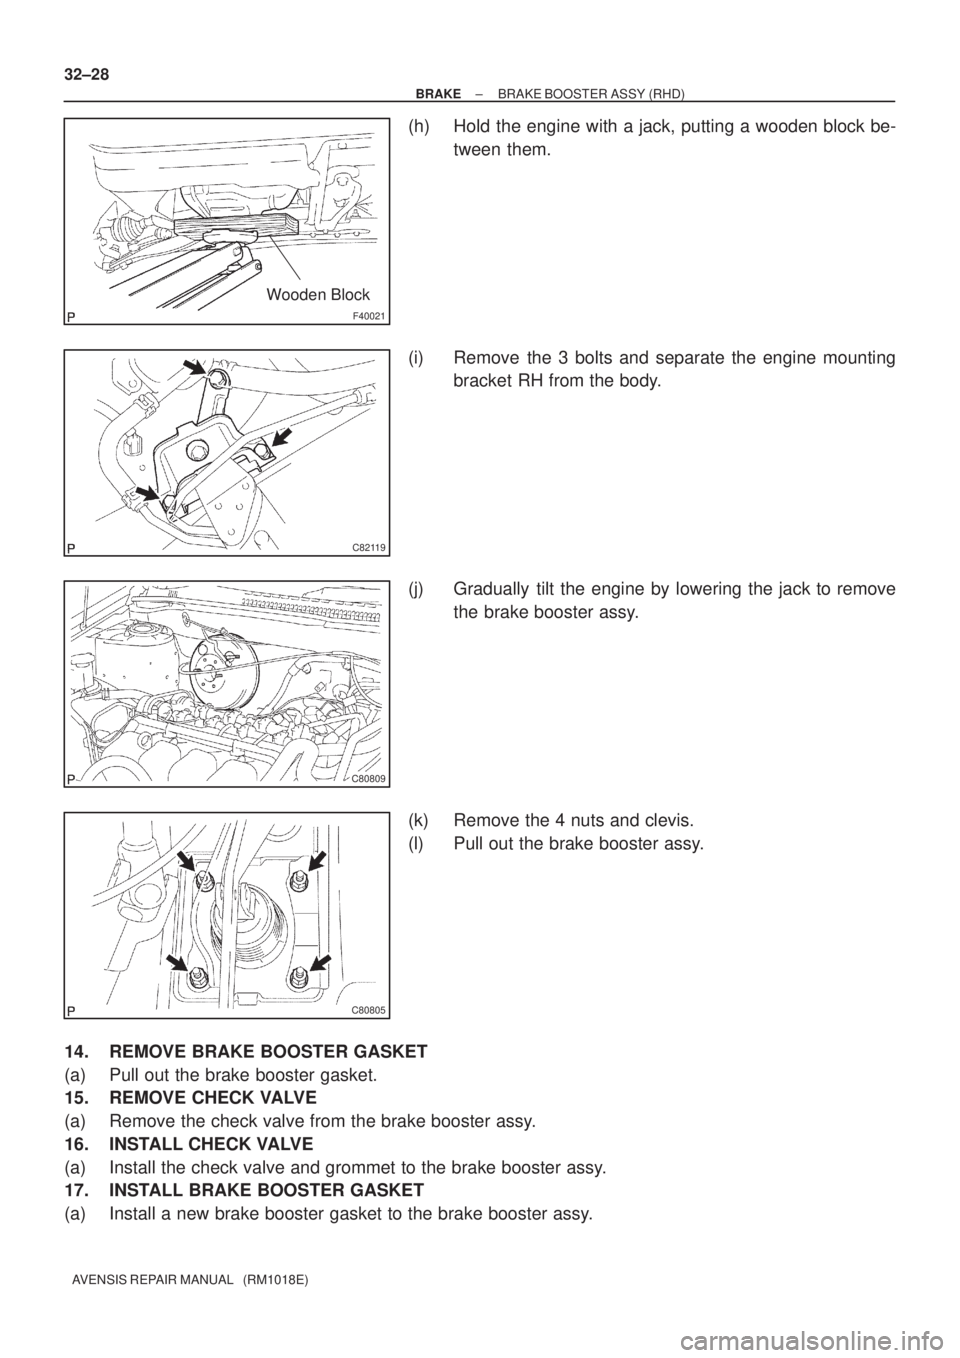 TOYOTA AVENSIS 2005  Service Repair Manual F40021
Wooden Block
C82119
C80809
C80805
32±28
± BRAKEBRAKE BOOSTER ASSY (RHD)
AVENSIS REPAIR MANUAL   (RM1018E)
(h) Hold the engine with a jack, putting a wooden block be-
tween them.
(i) Remove th